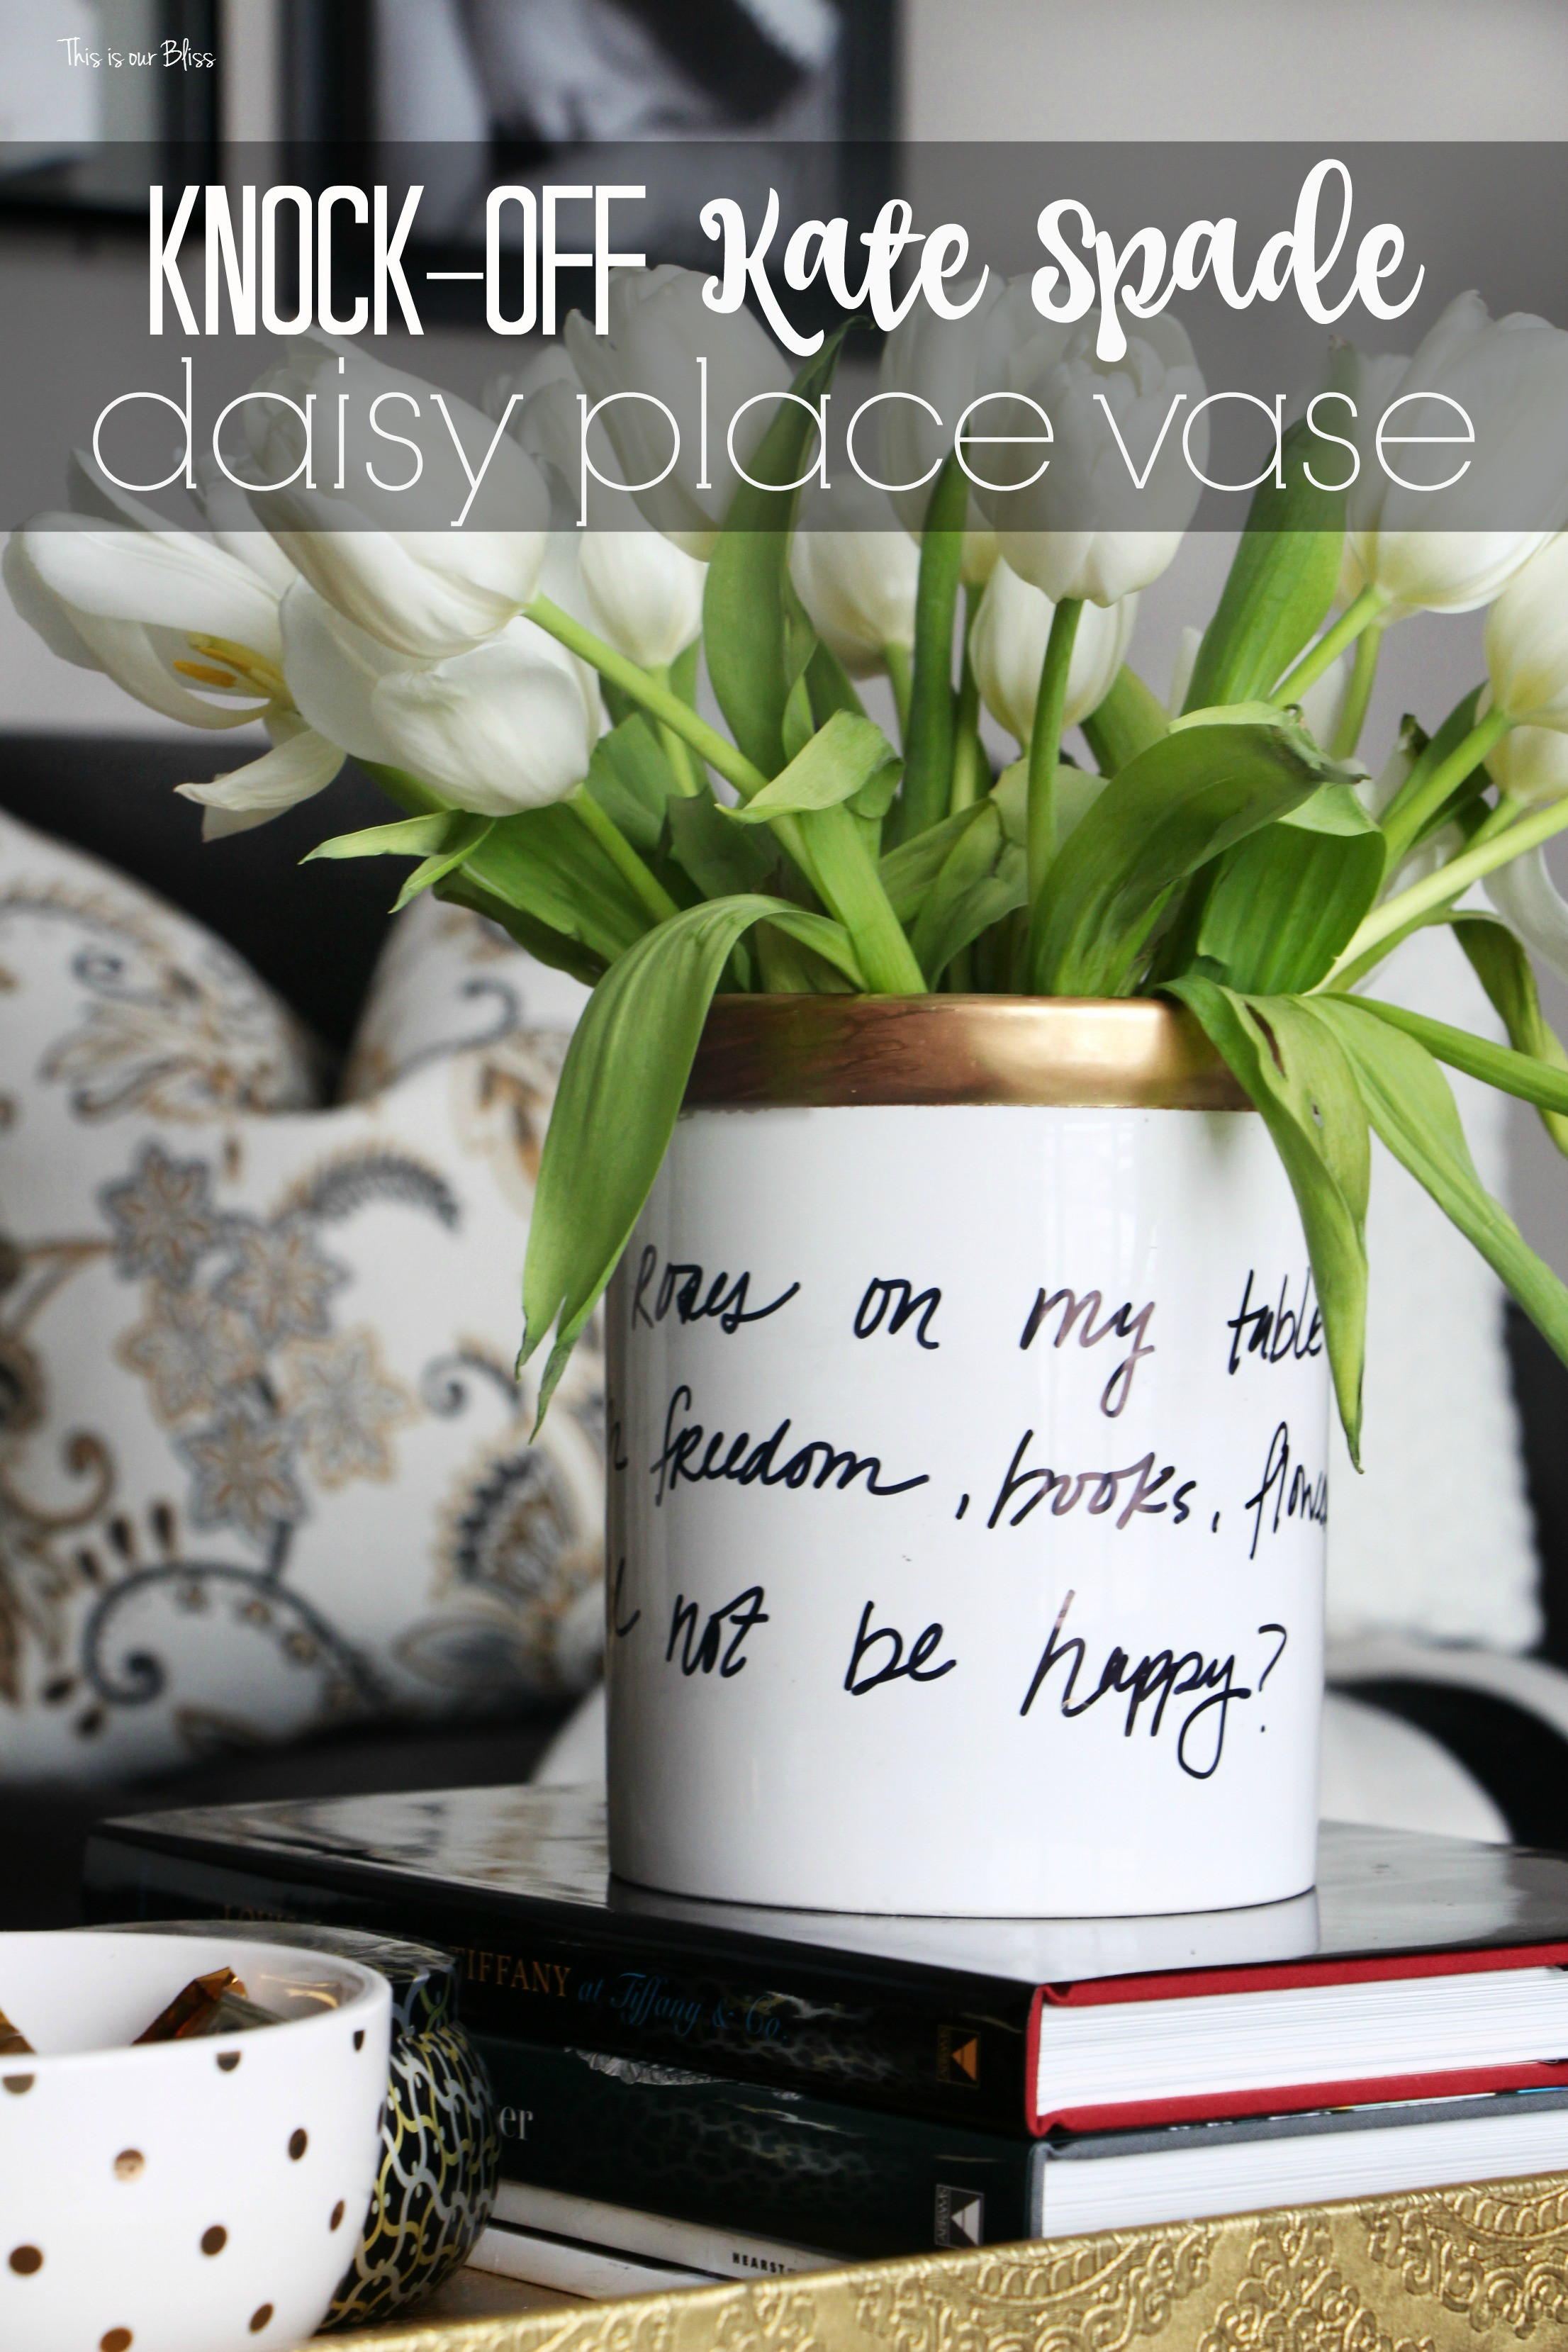 25 Stunning Kate Spade Owl Vase 2024 free download kate spade owl vase of inspired by diy kate spade inspired vase this is our bliss in knock off kate spade daisy place vase knock it off diy monthly blogger challenge how to create a kate spa